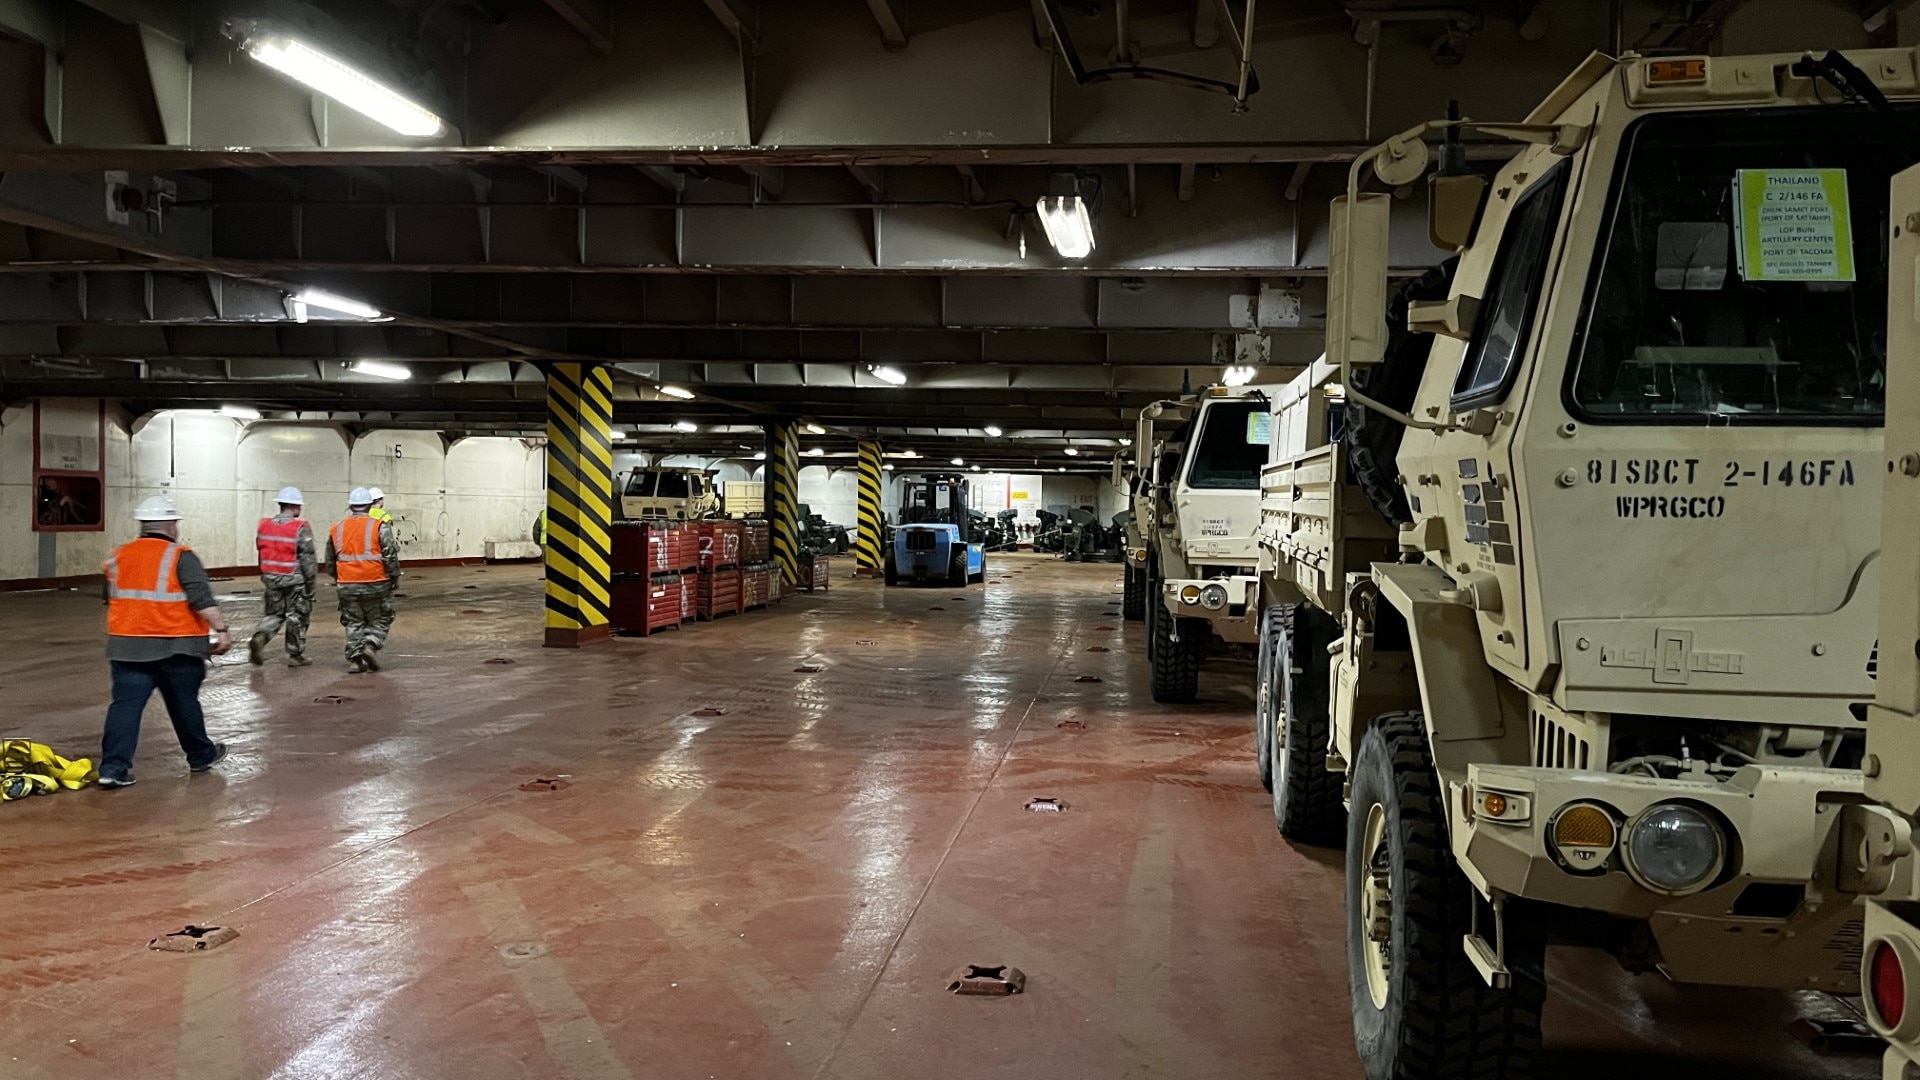 Vehicles from 2nd Battalion, 146th Field Artillery Regiment, Washington National Guard, sit in the loading bay of a cargo ship as it is being loaded for travel to the Kingdom of Thailand prior to Hanuman Guardian 23 on May 23, 2023, at the Port of Tacoma, Wash.